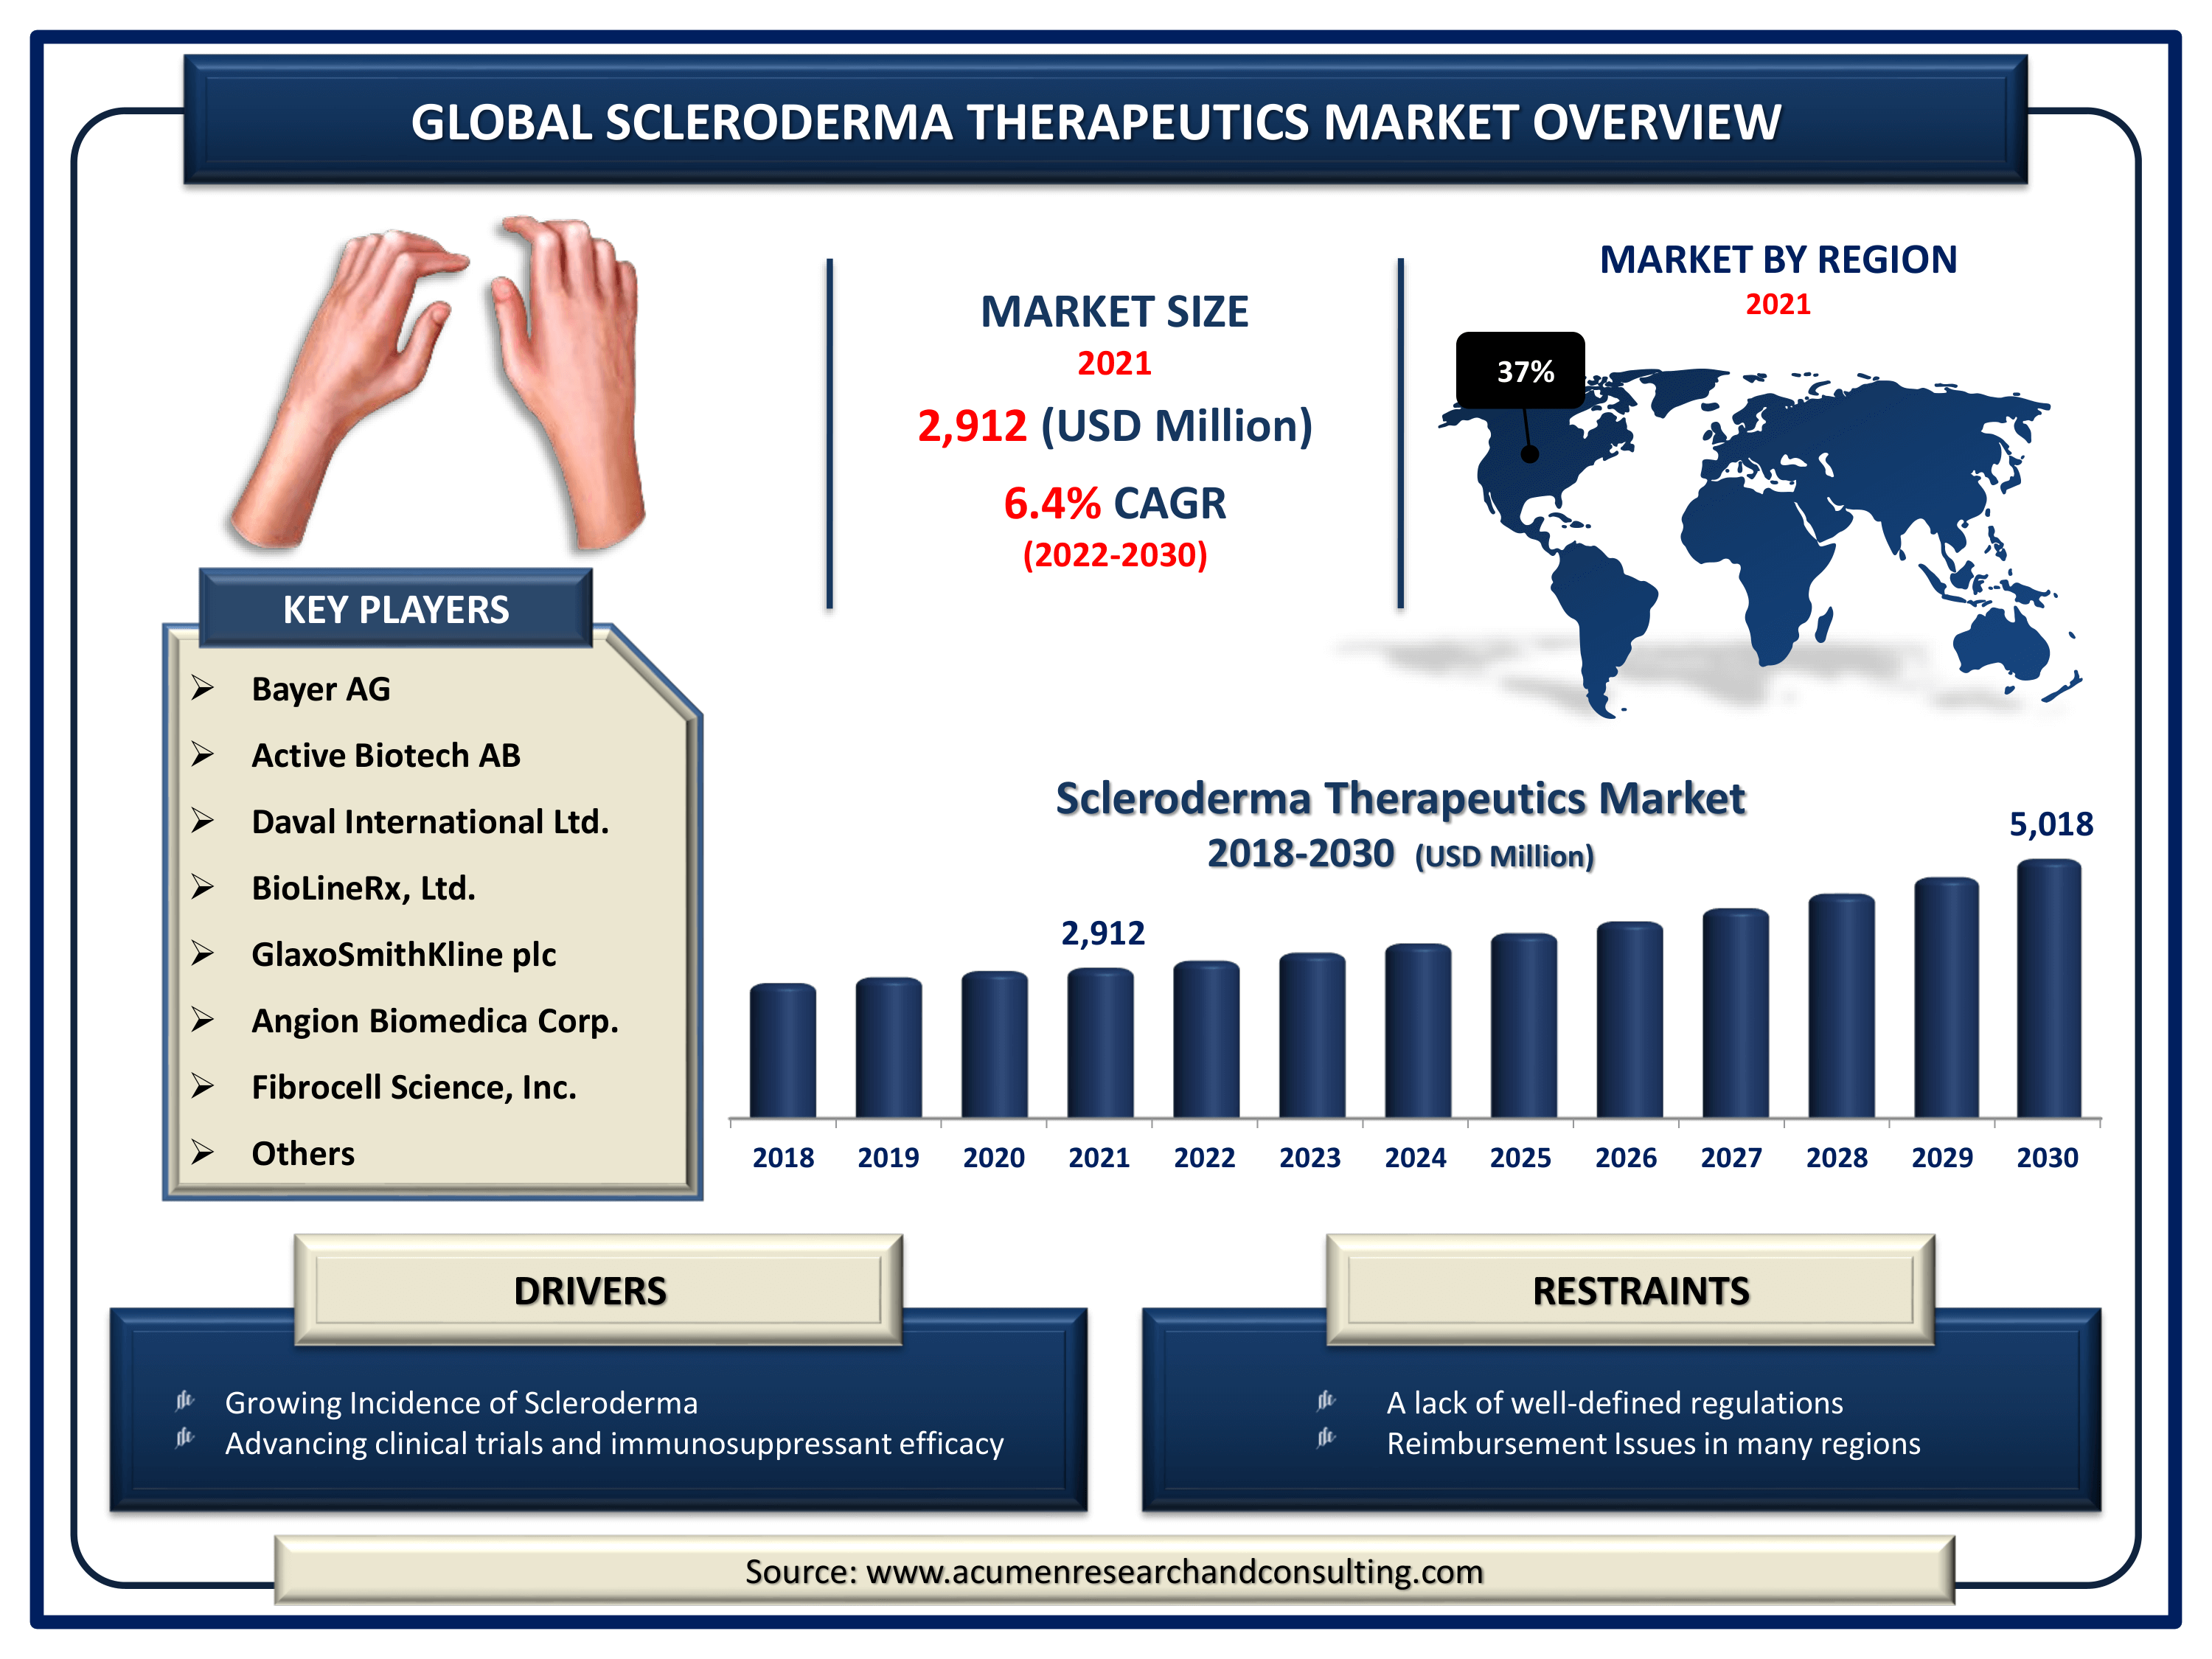 Global scleroderma therapeutics market revenue is expected to expand by USD 5,018 million by 2030, with a 6.4% CAGR from 2022 to 2030